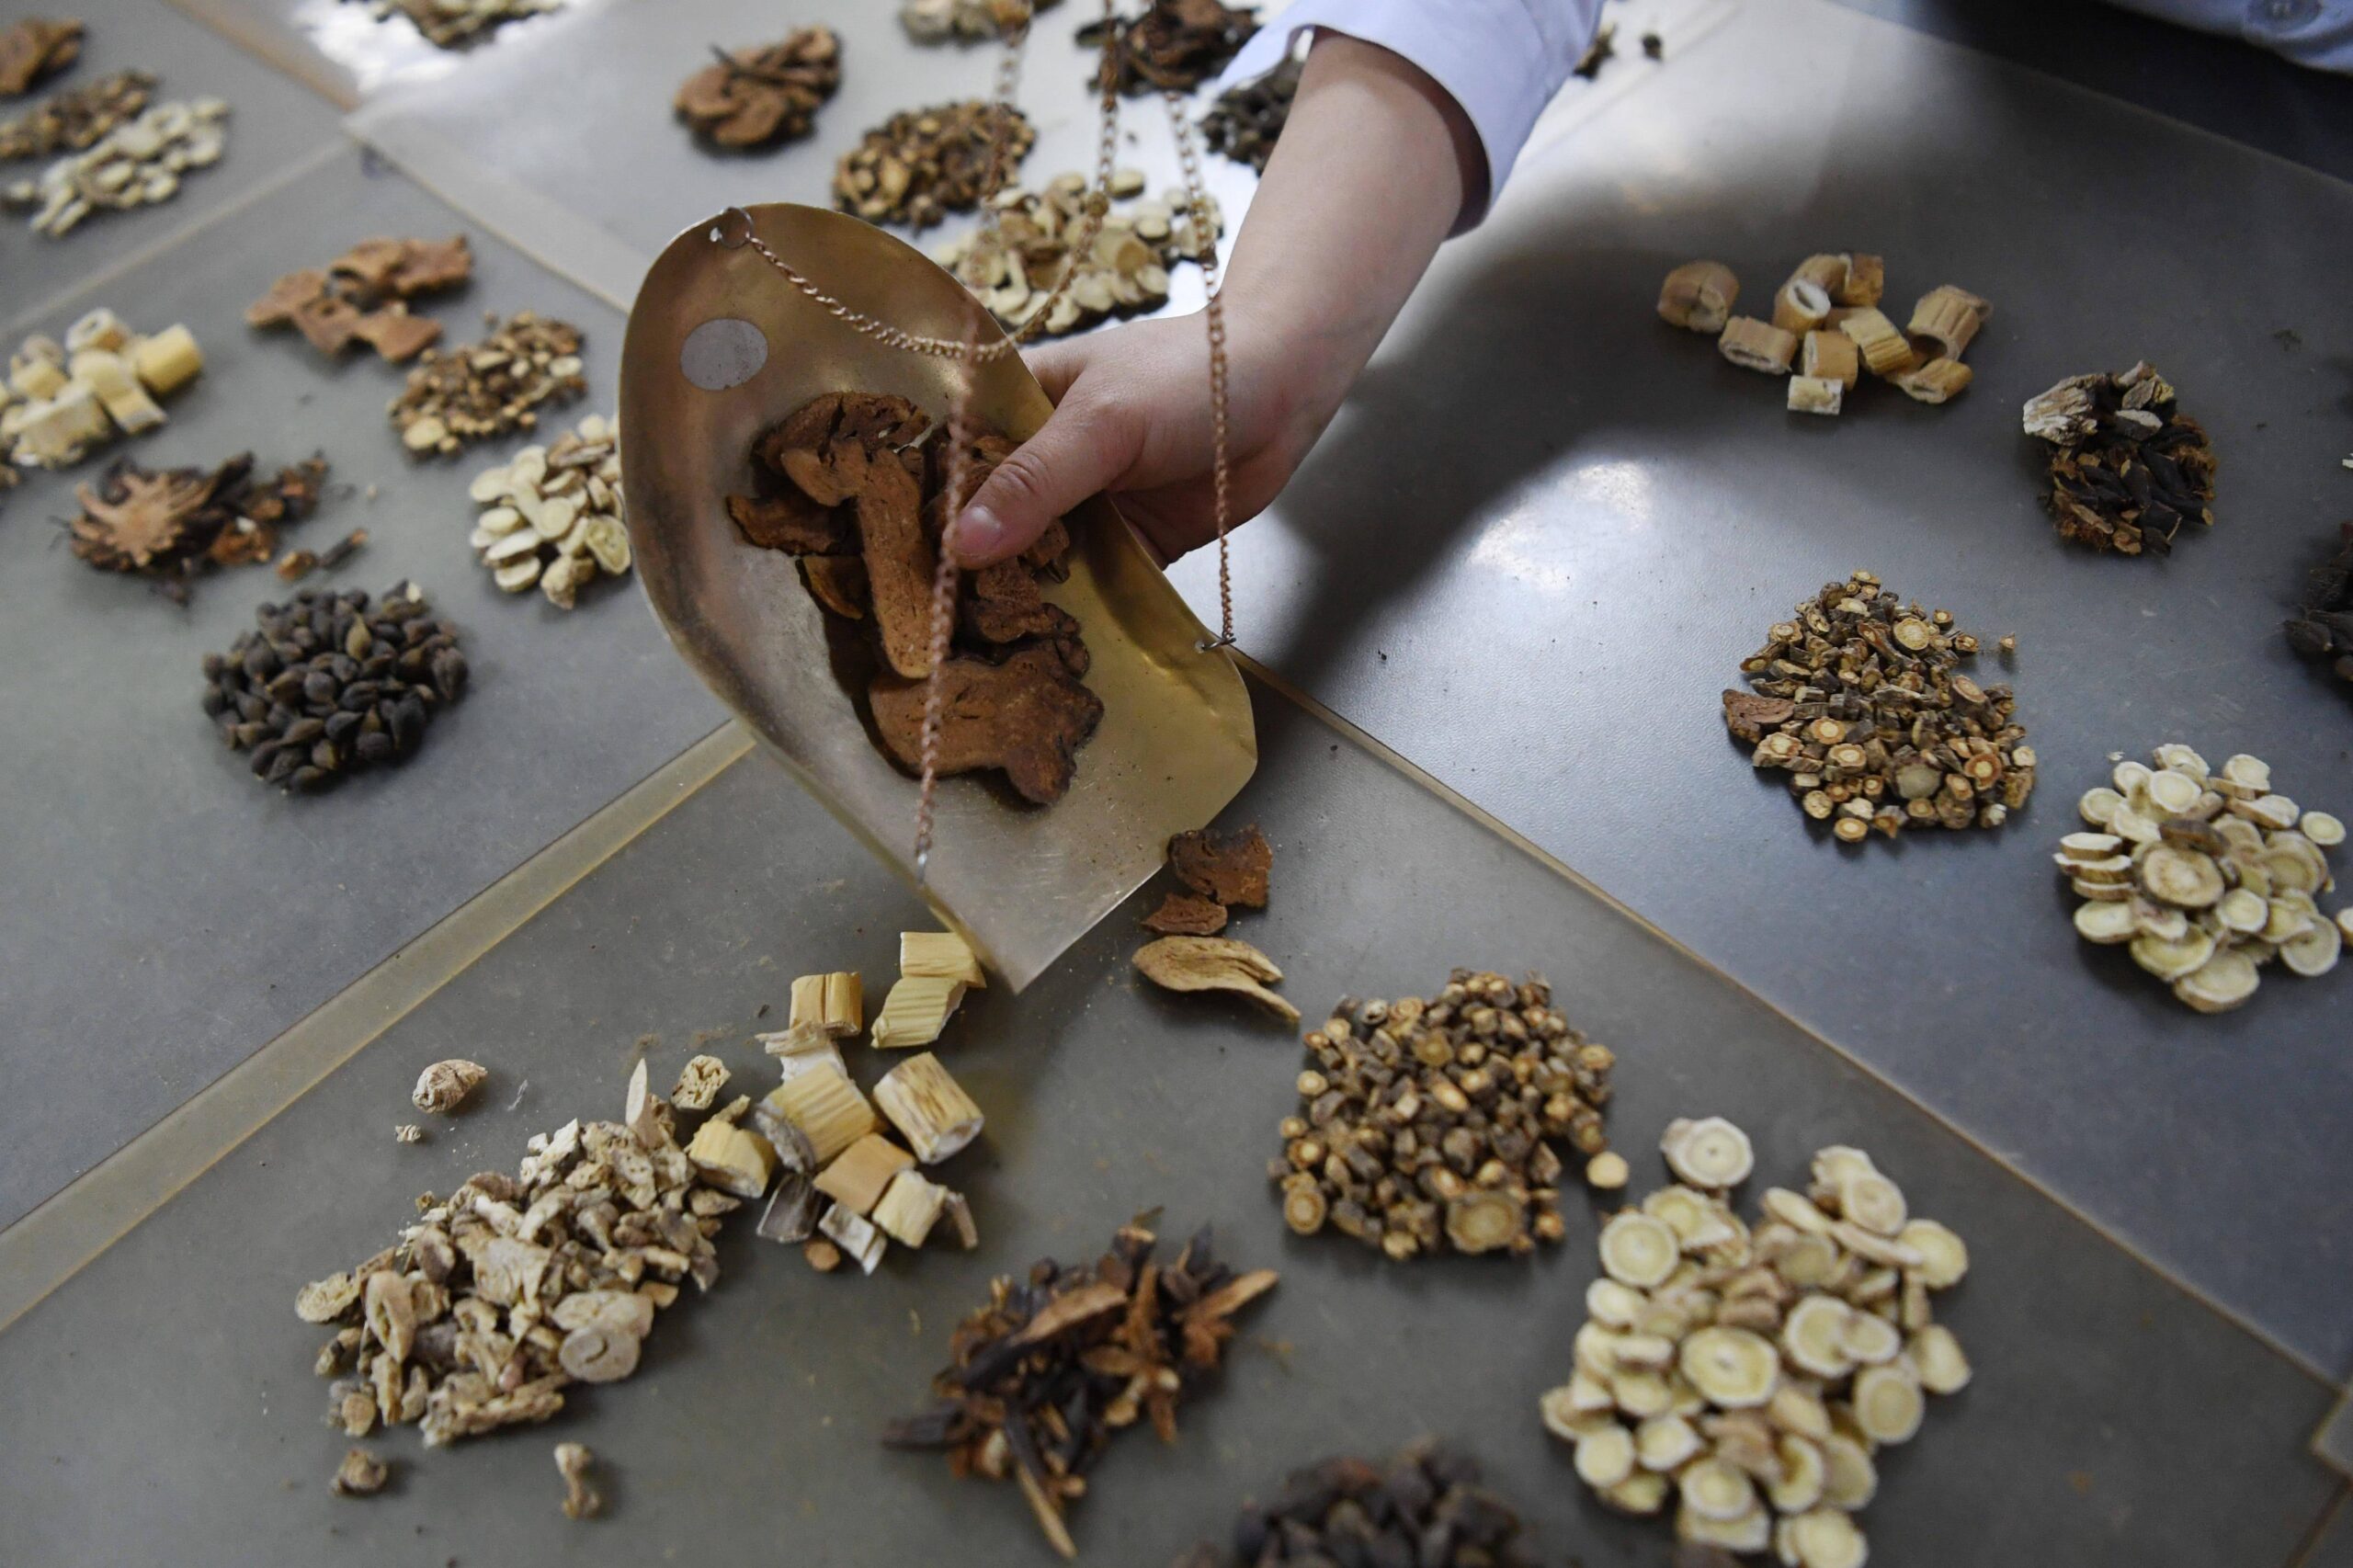 What You Should Know About Chinese Herbs